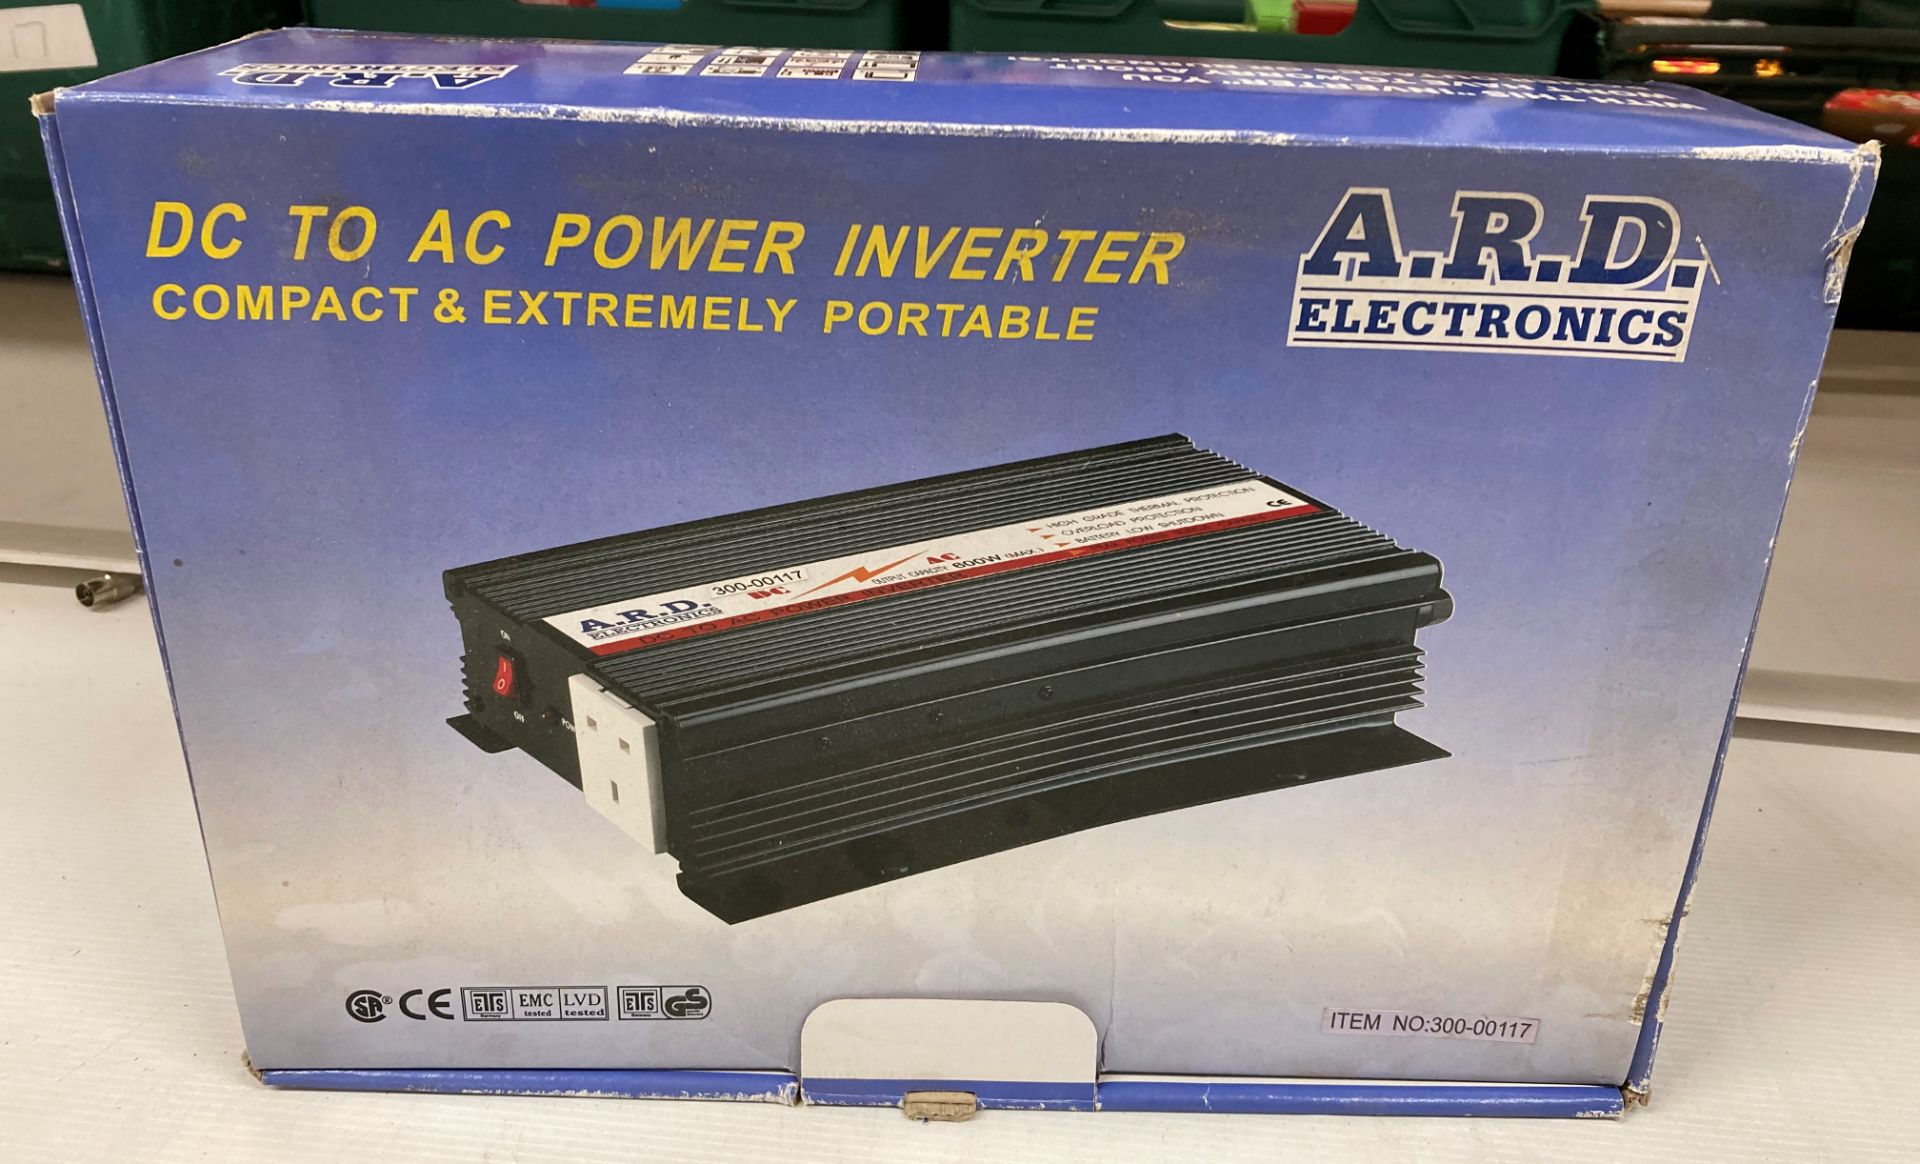 ARD electronics DC to AC power inverter (no test) (H13)